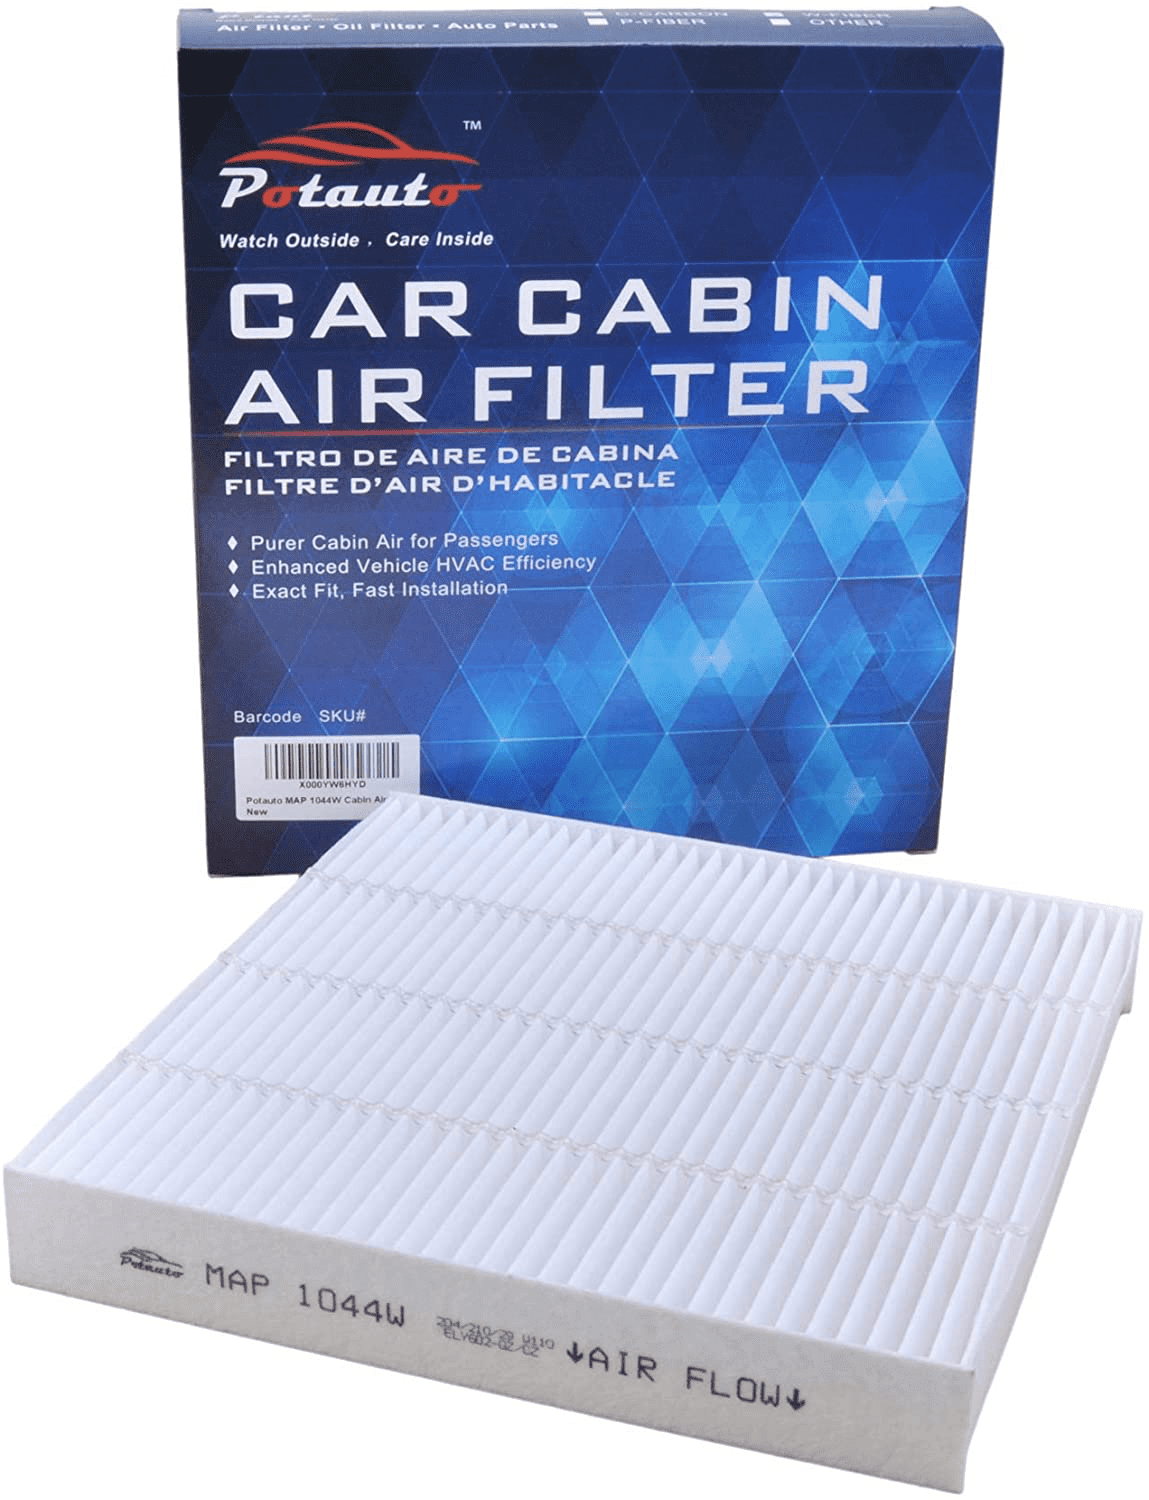 CABIN Air filter for Honda CR-V CR-Z Civic Clarity FIT Odyssey Acura RDX TLX